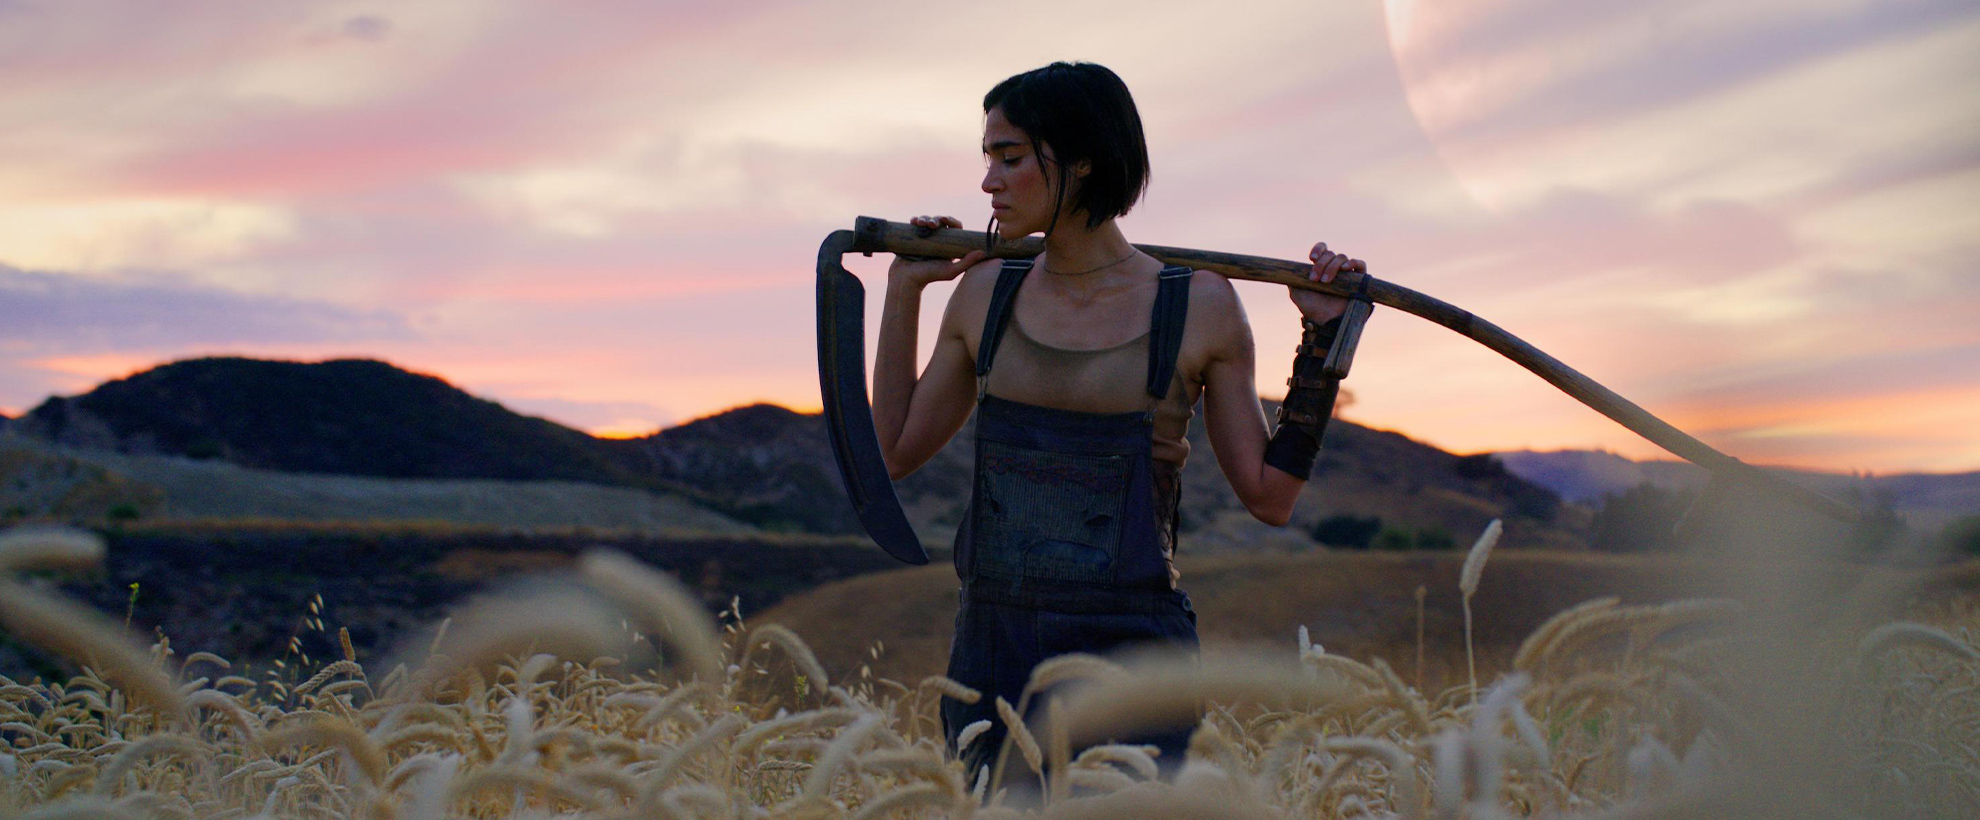 A young woman stands in a field against a sunset, holding a scythe